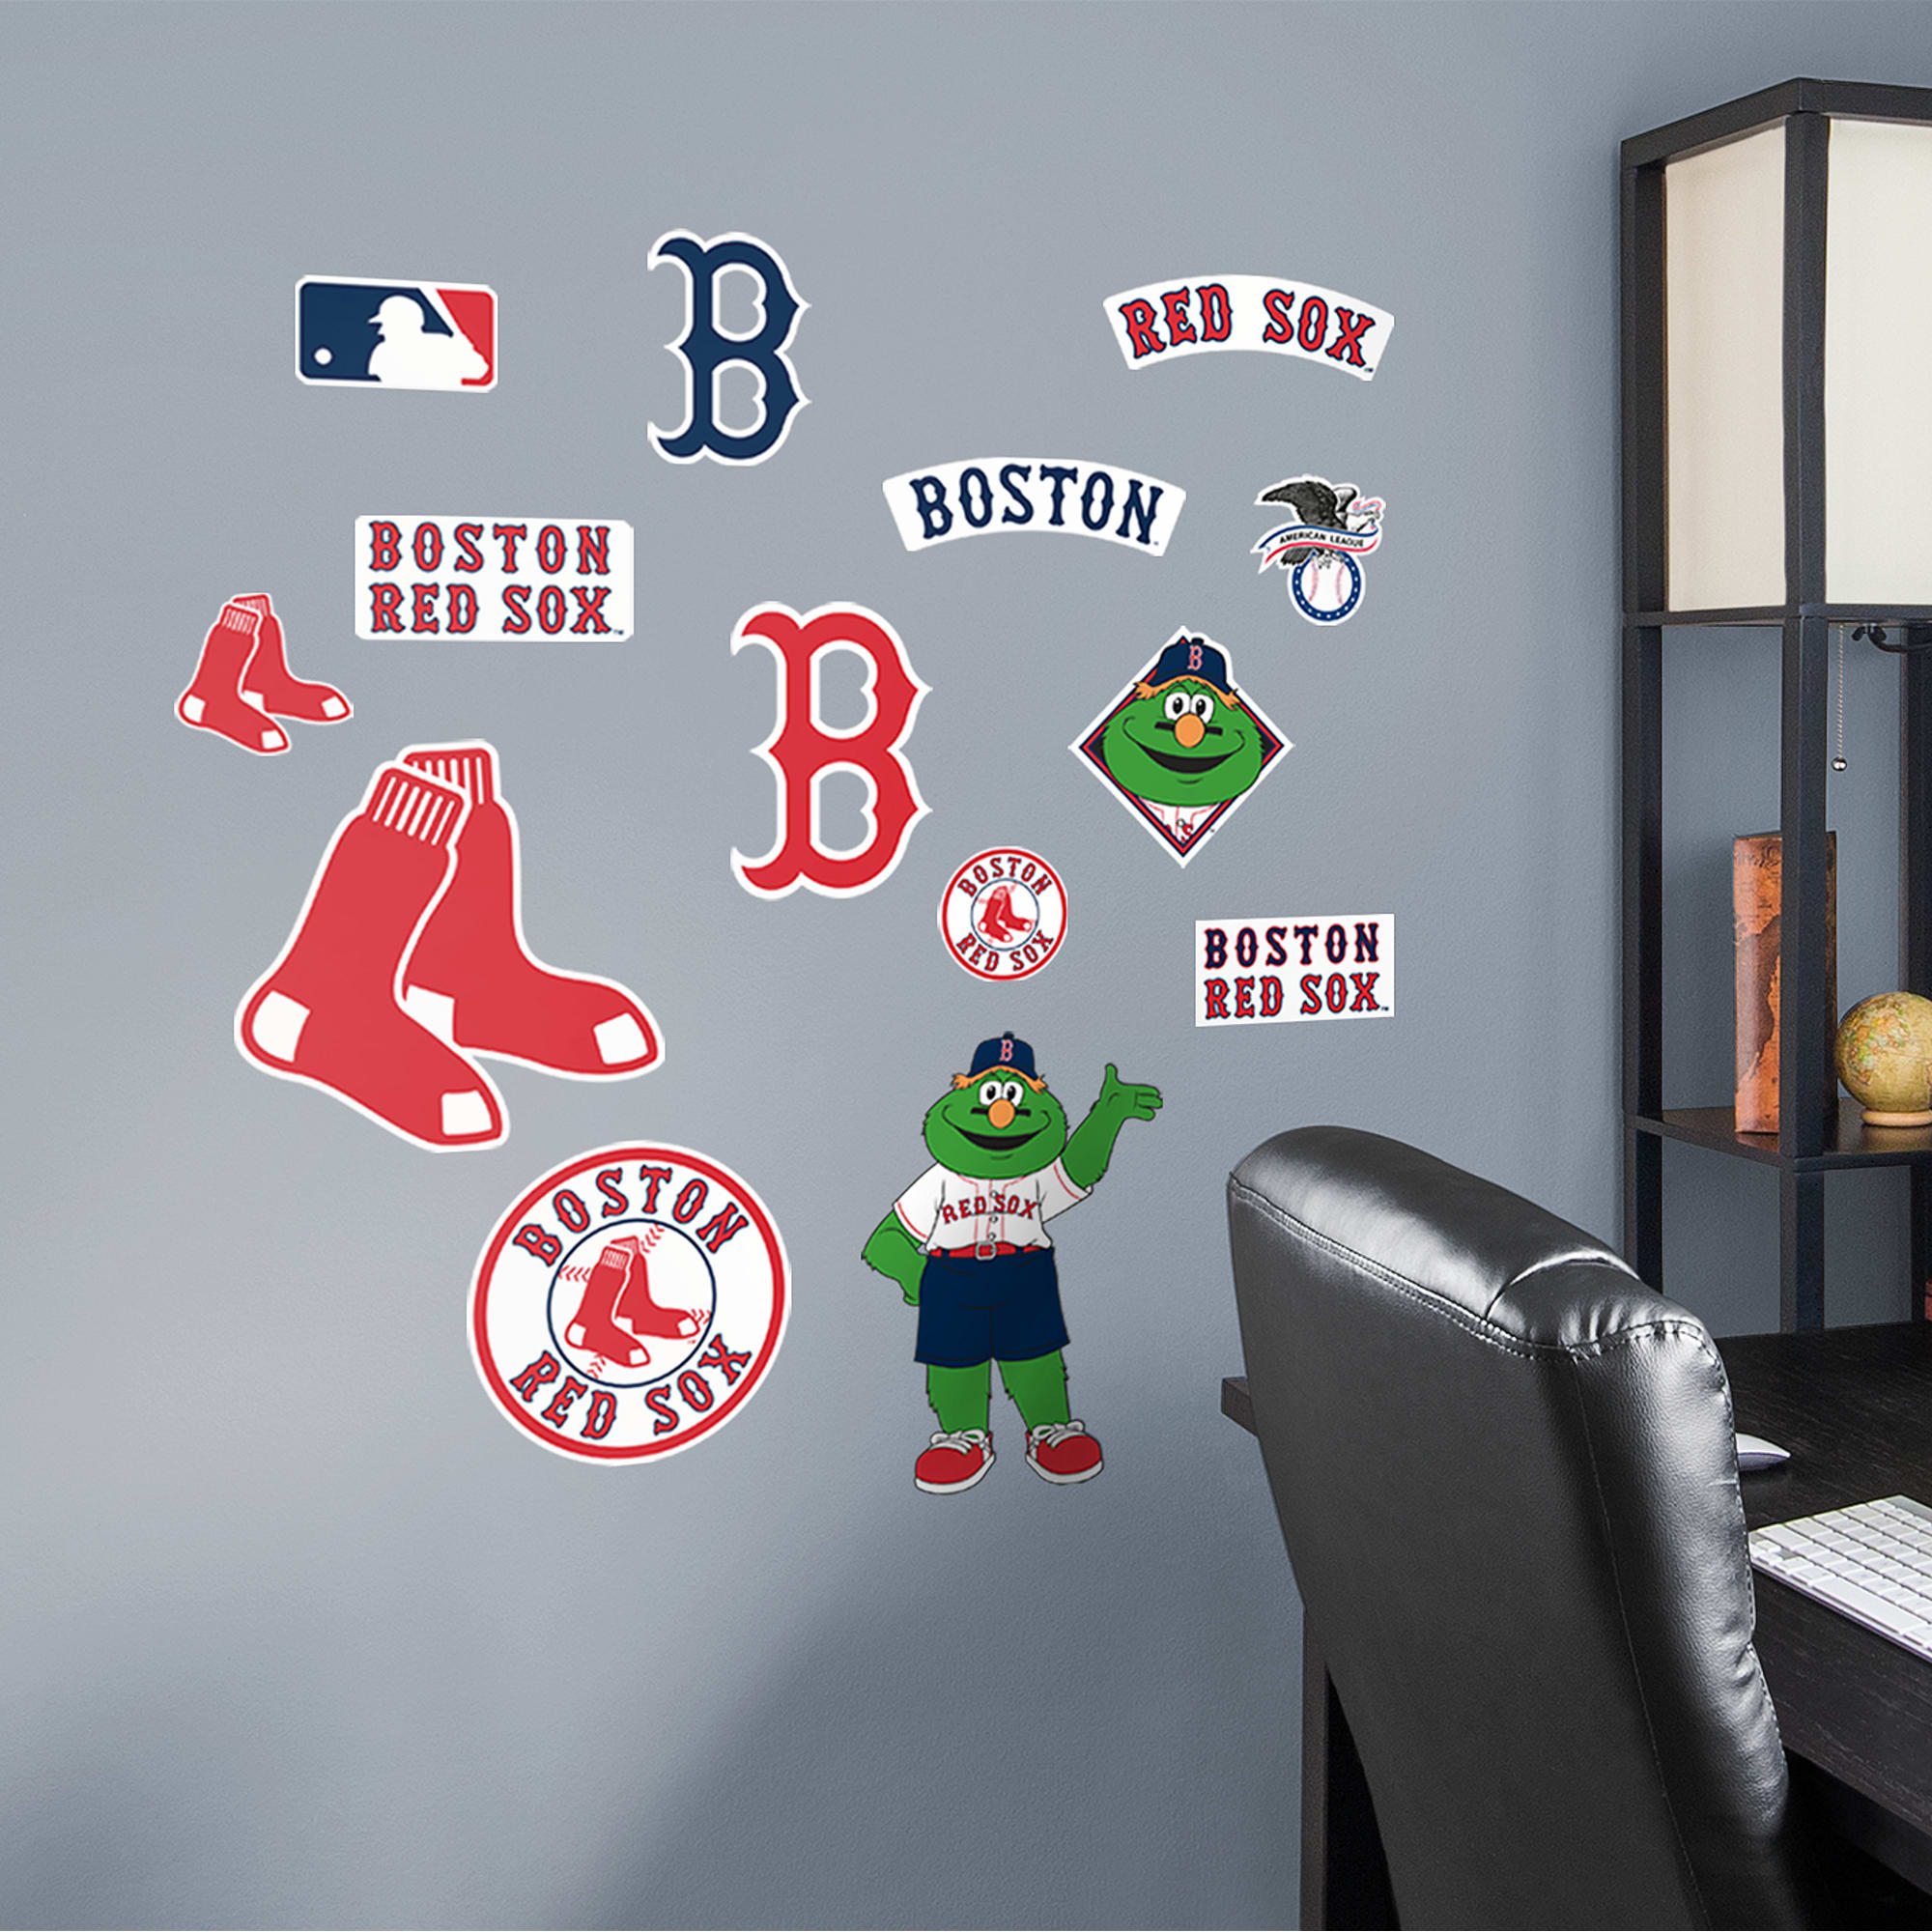 Boston Red Sox: Logo Assortment - Officially Licensed MLB Removable Wall Decals 75"W x 39.5"H by Fathead | Vinyl